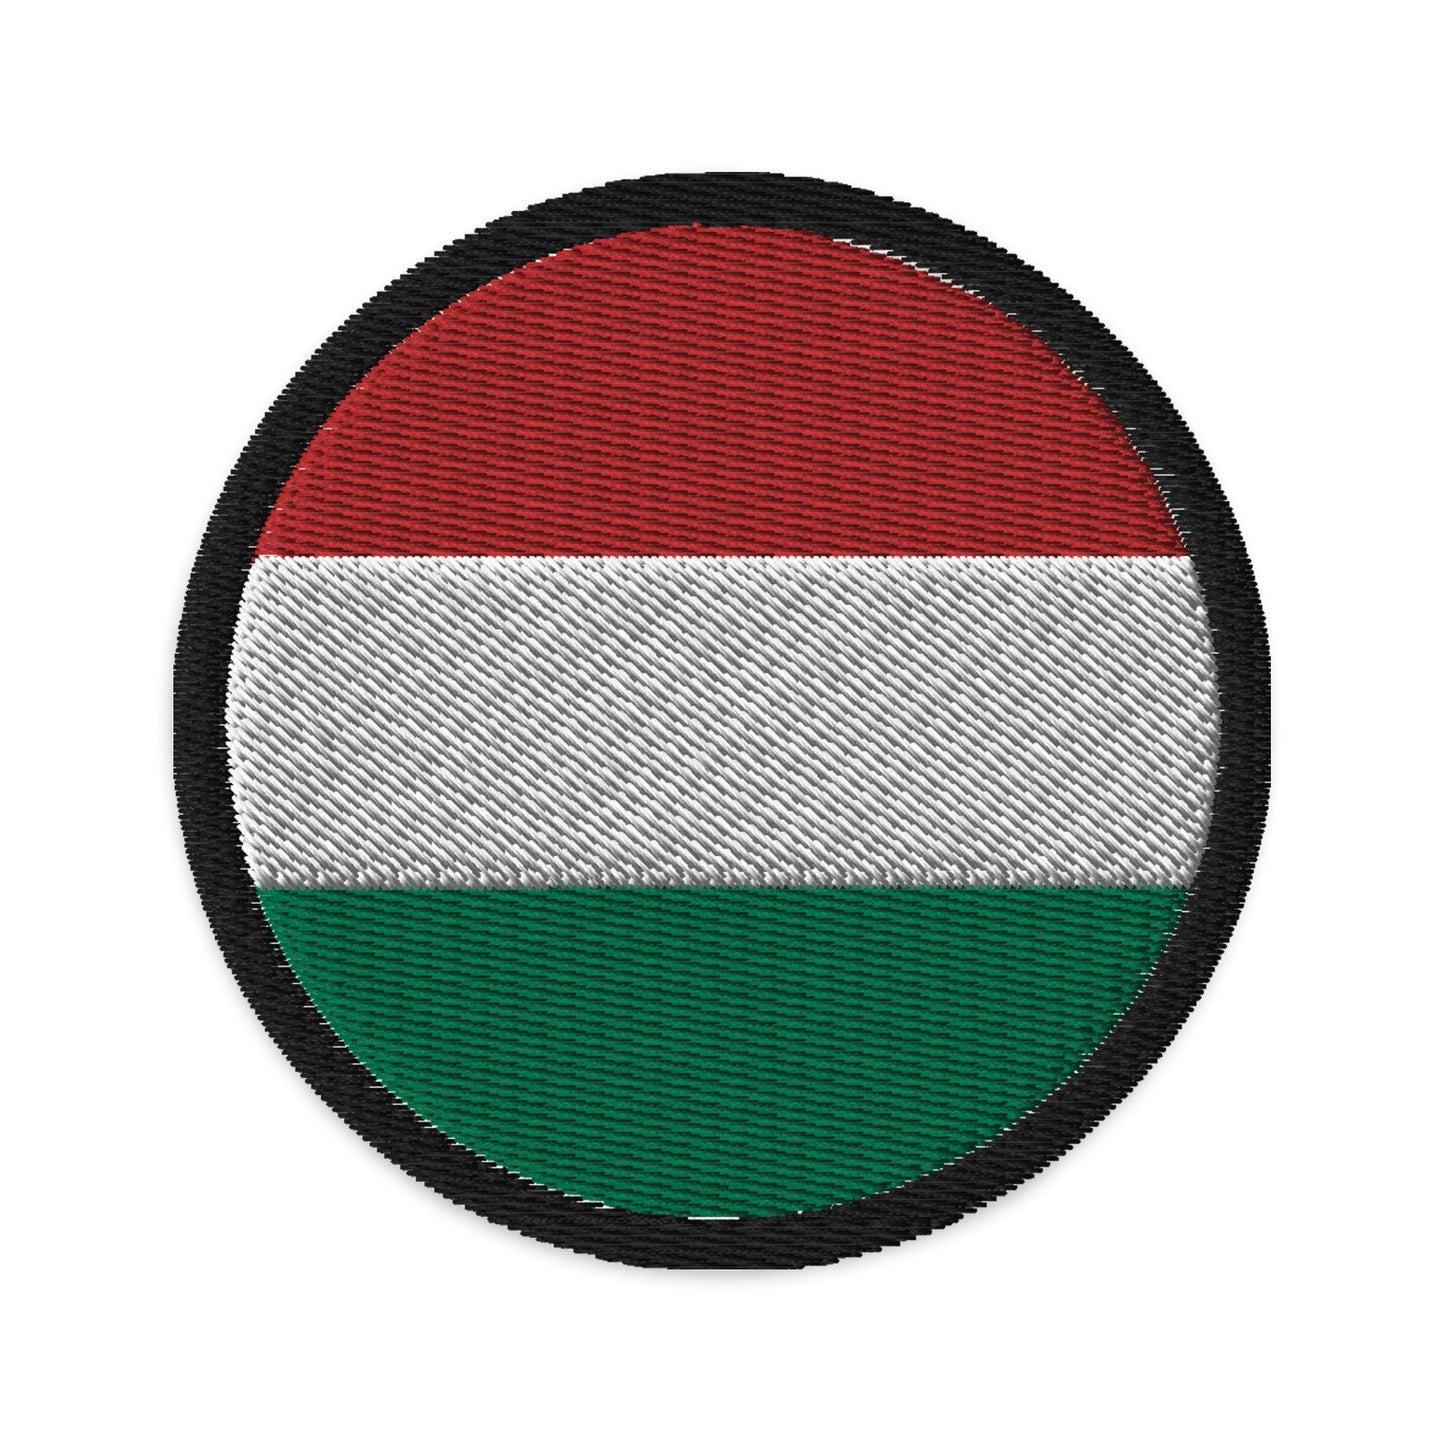 RR™ Hungarian Flag Design Embroidered Patches - Somocska - Red Rosehip Studio